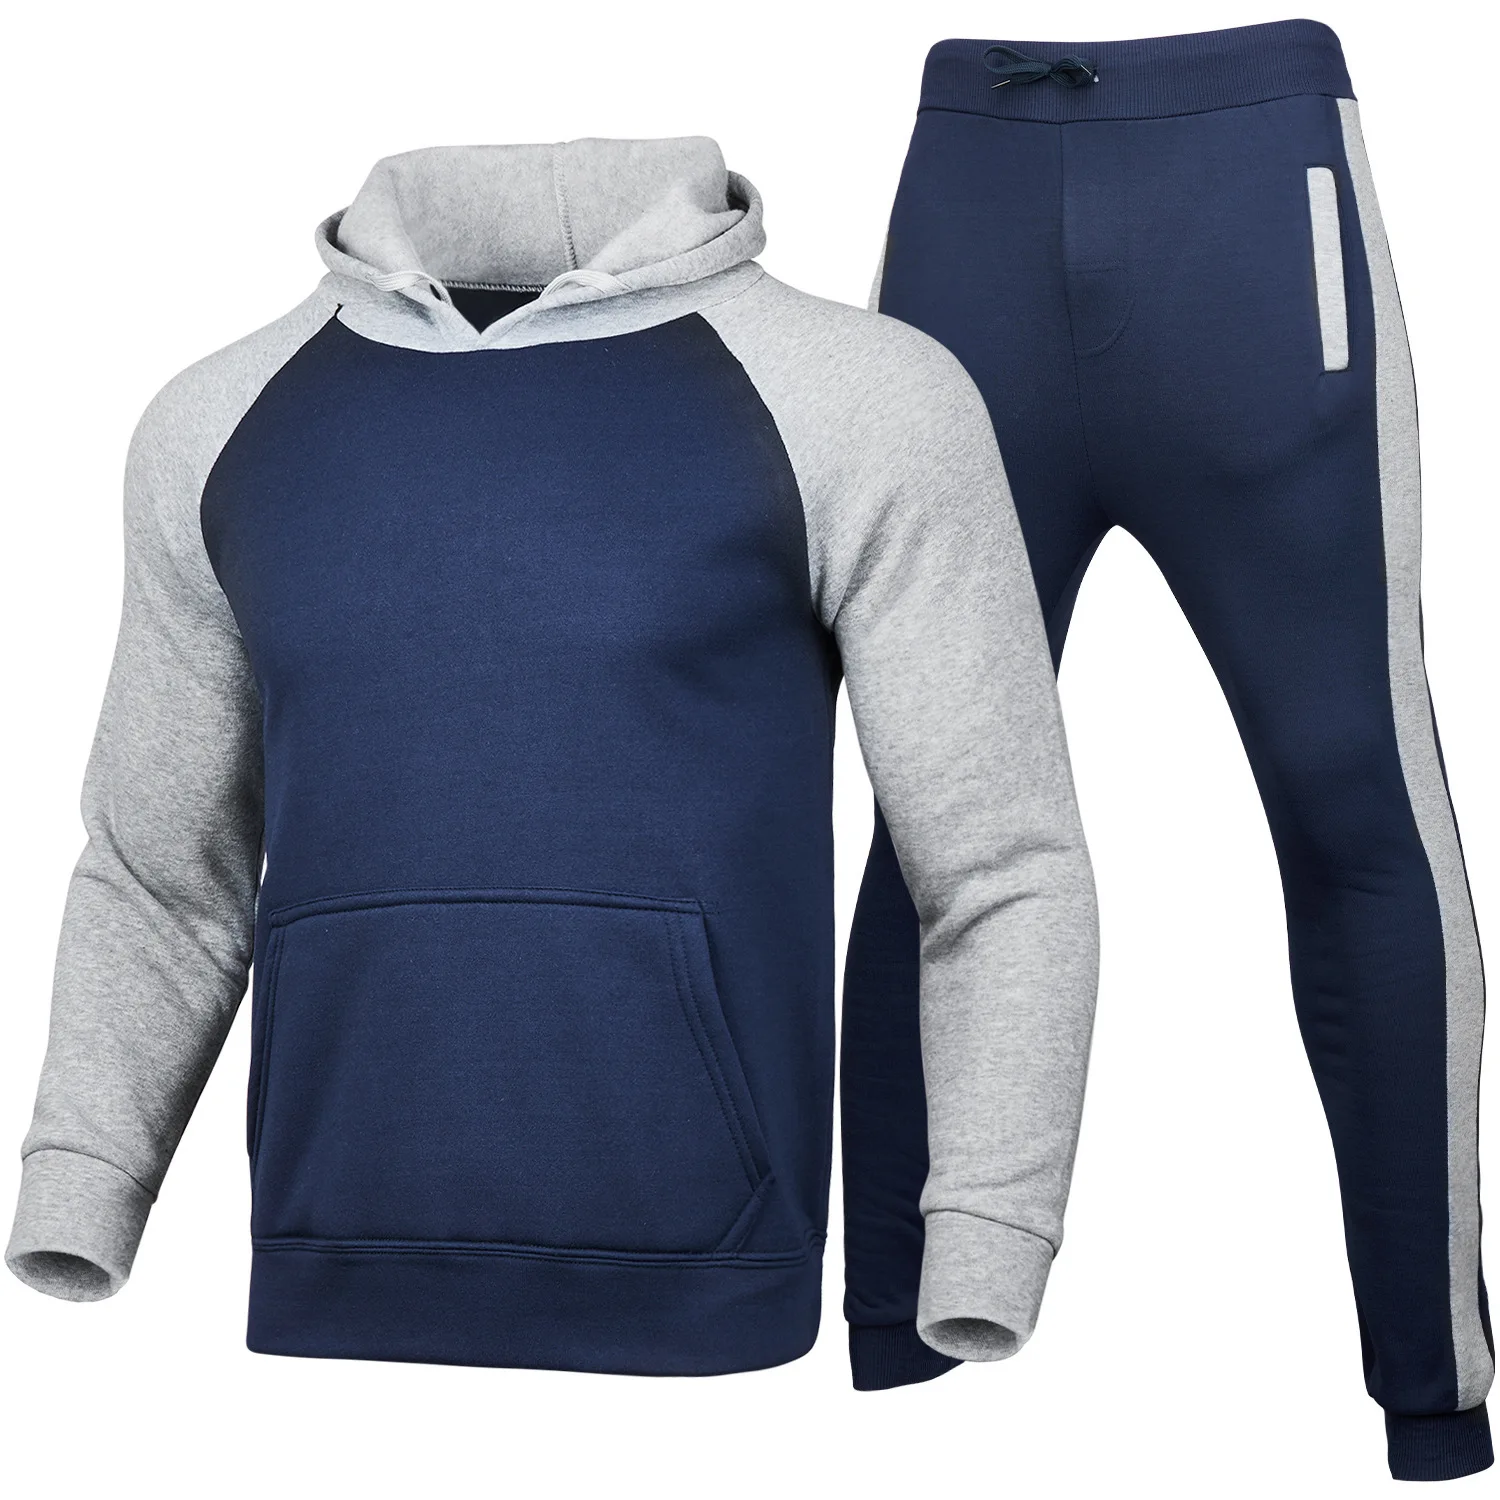 Men Women Patchwork Hoodies+Pants Sets Tracksuit Students Running Fitness Sportswear Casual Pullover Sweat Suits Couples Outwear